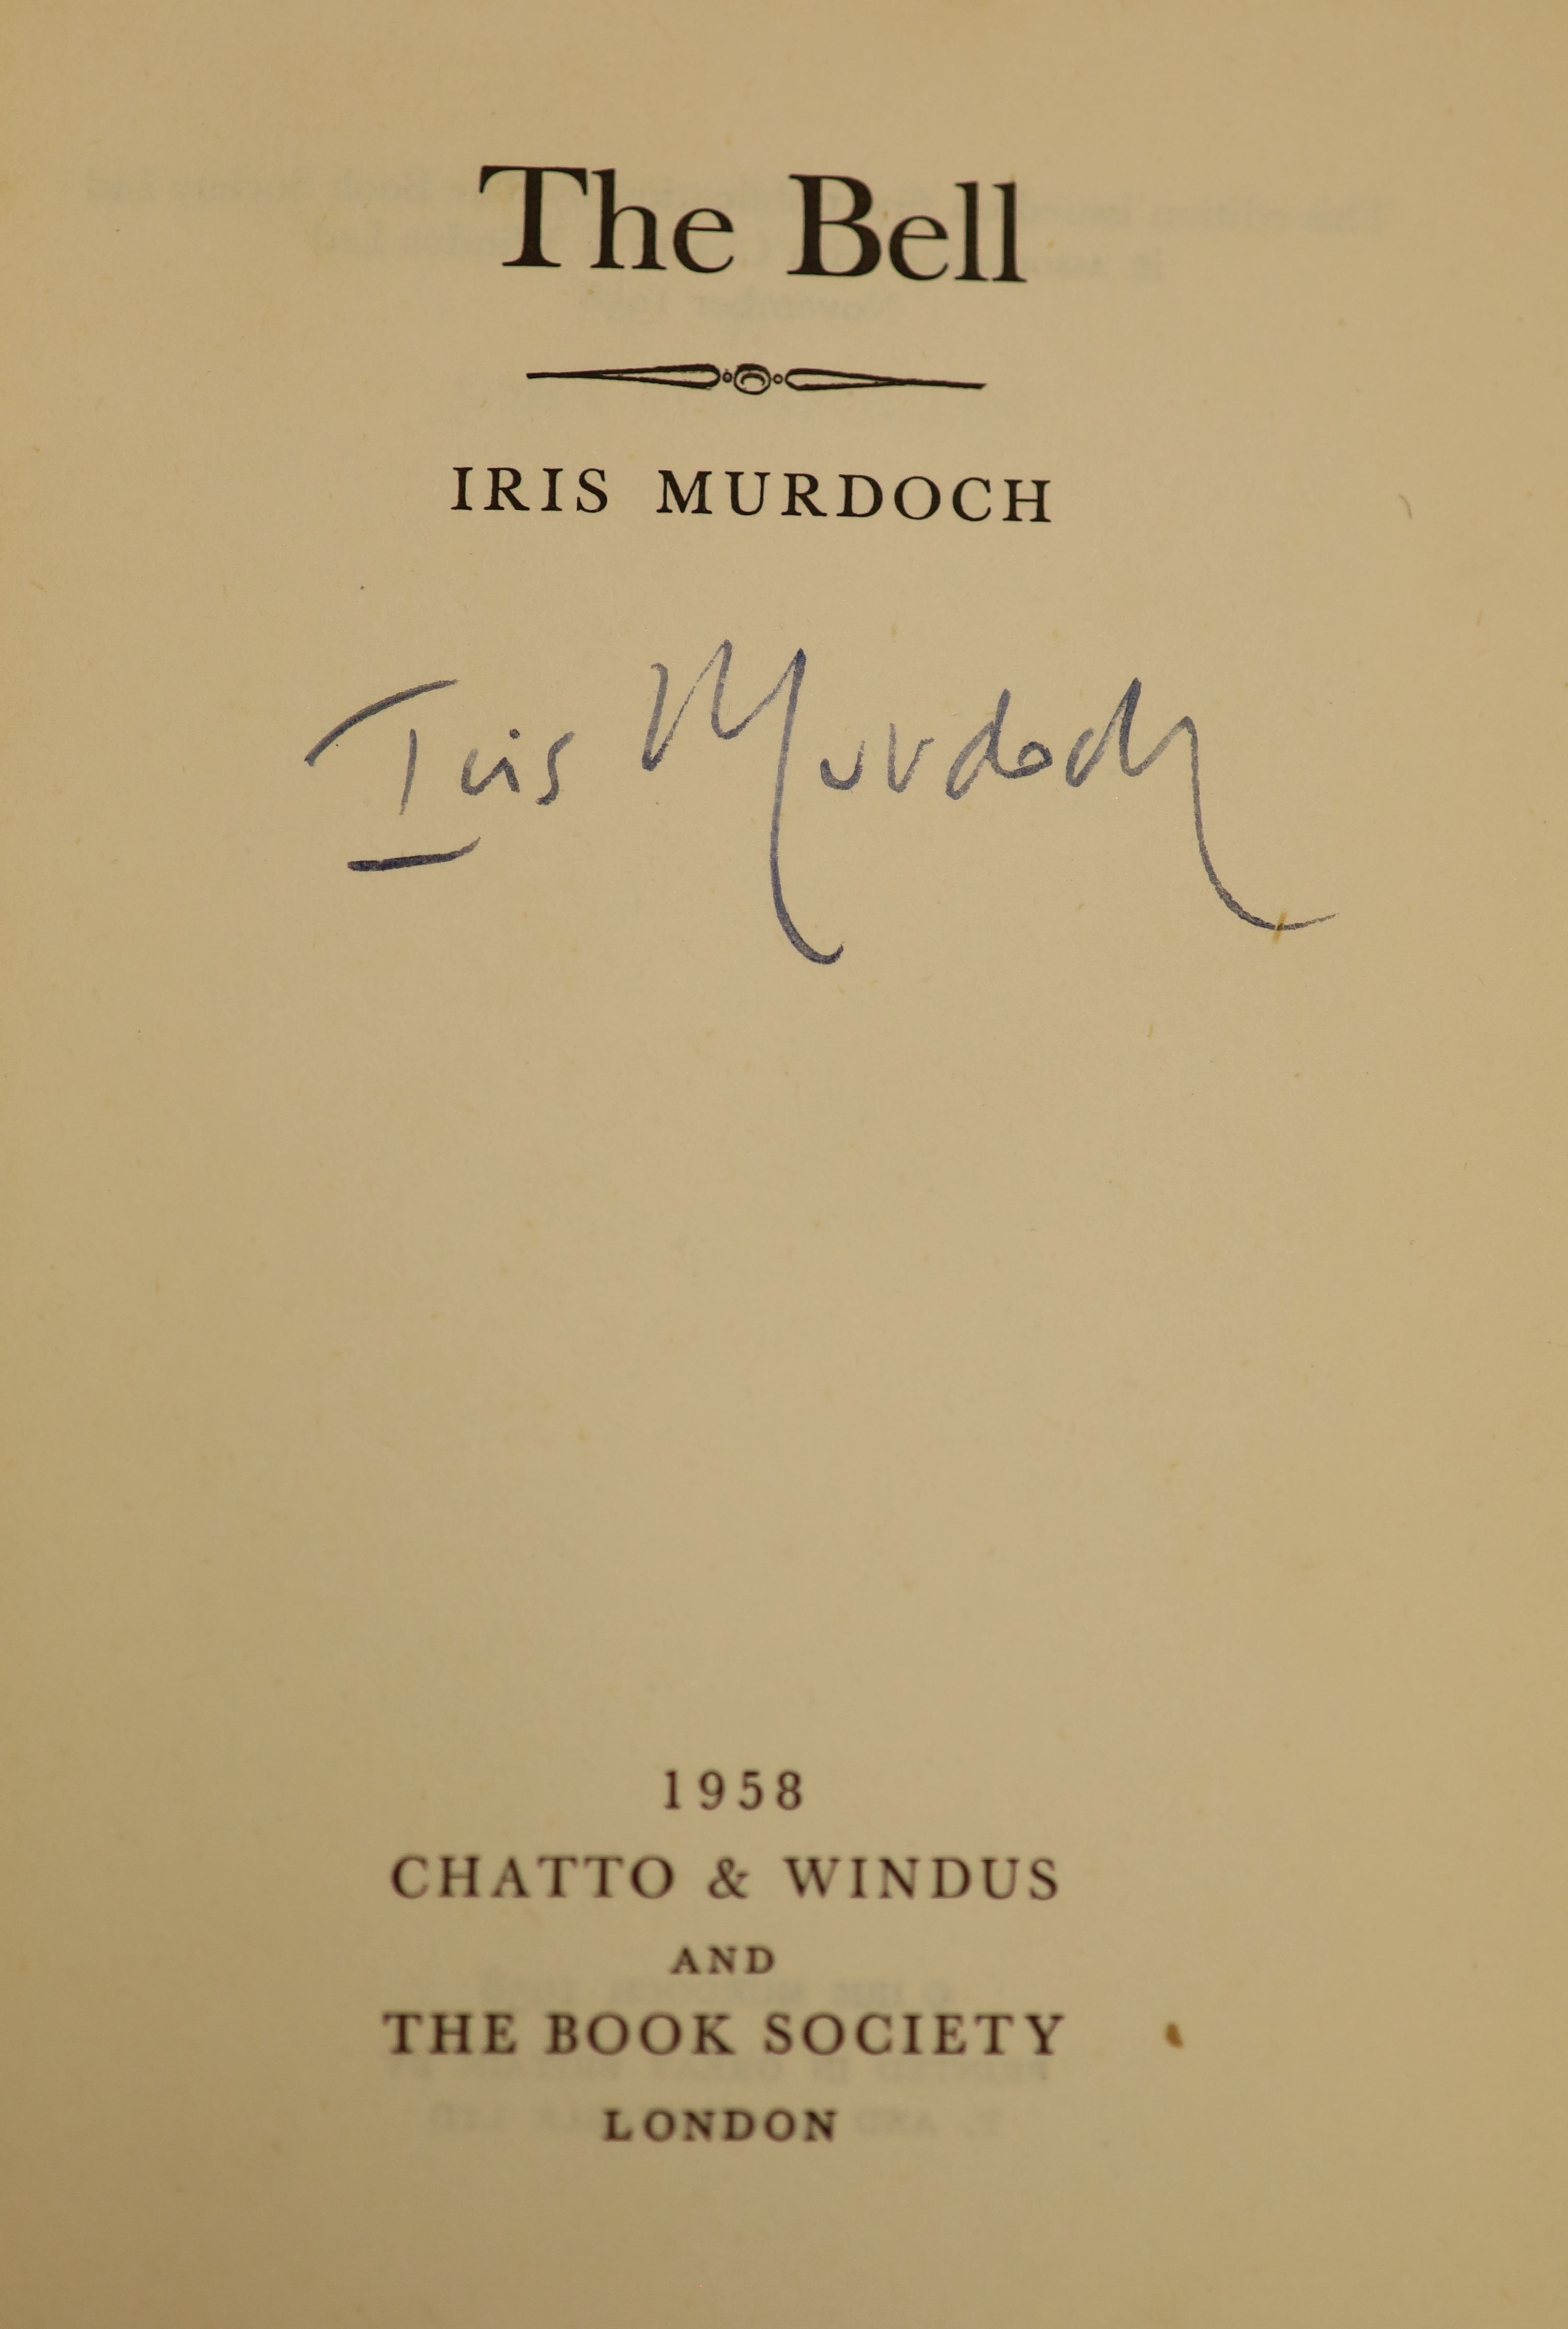 Murdoch, Iris - 4 works - The Flight from the Enchanter, 1st edition, in d/j with minor chips and darkening, bookplate to pastedown, Chatto and Windus, London, 1956; A Severed Head, with d/j, London, 1961; The Bell, with